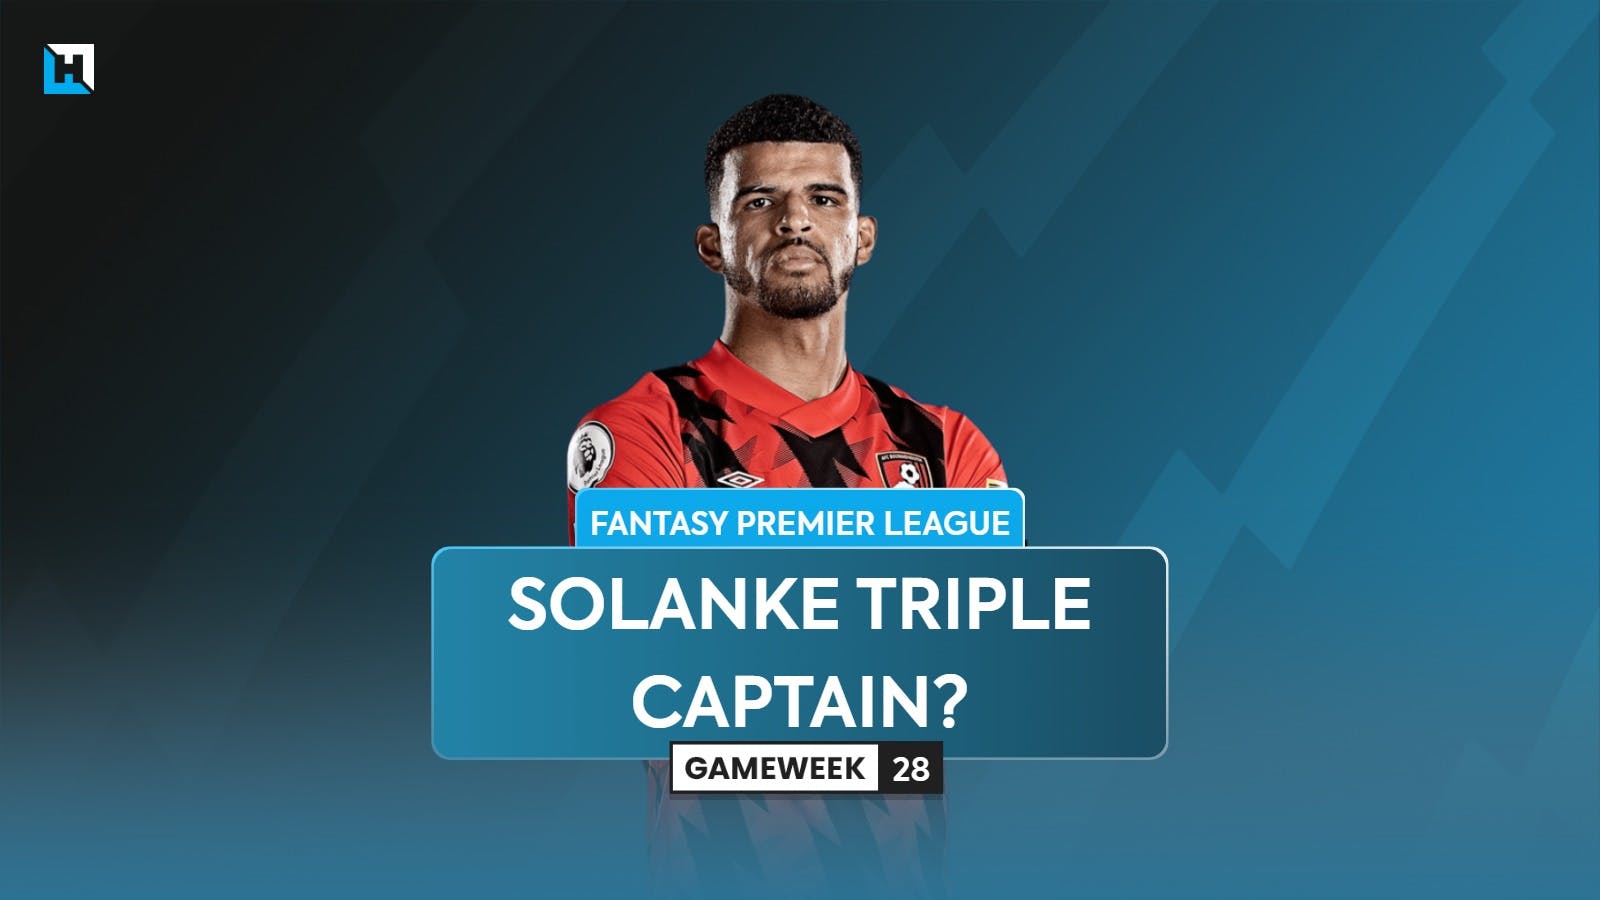 Is triple captaining Solanke in FPL Double Gameweek 28 the best option left?